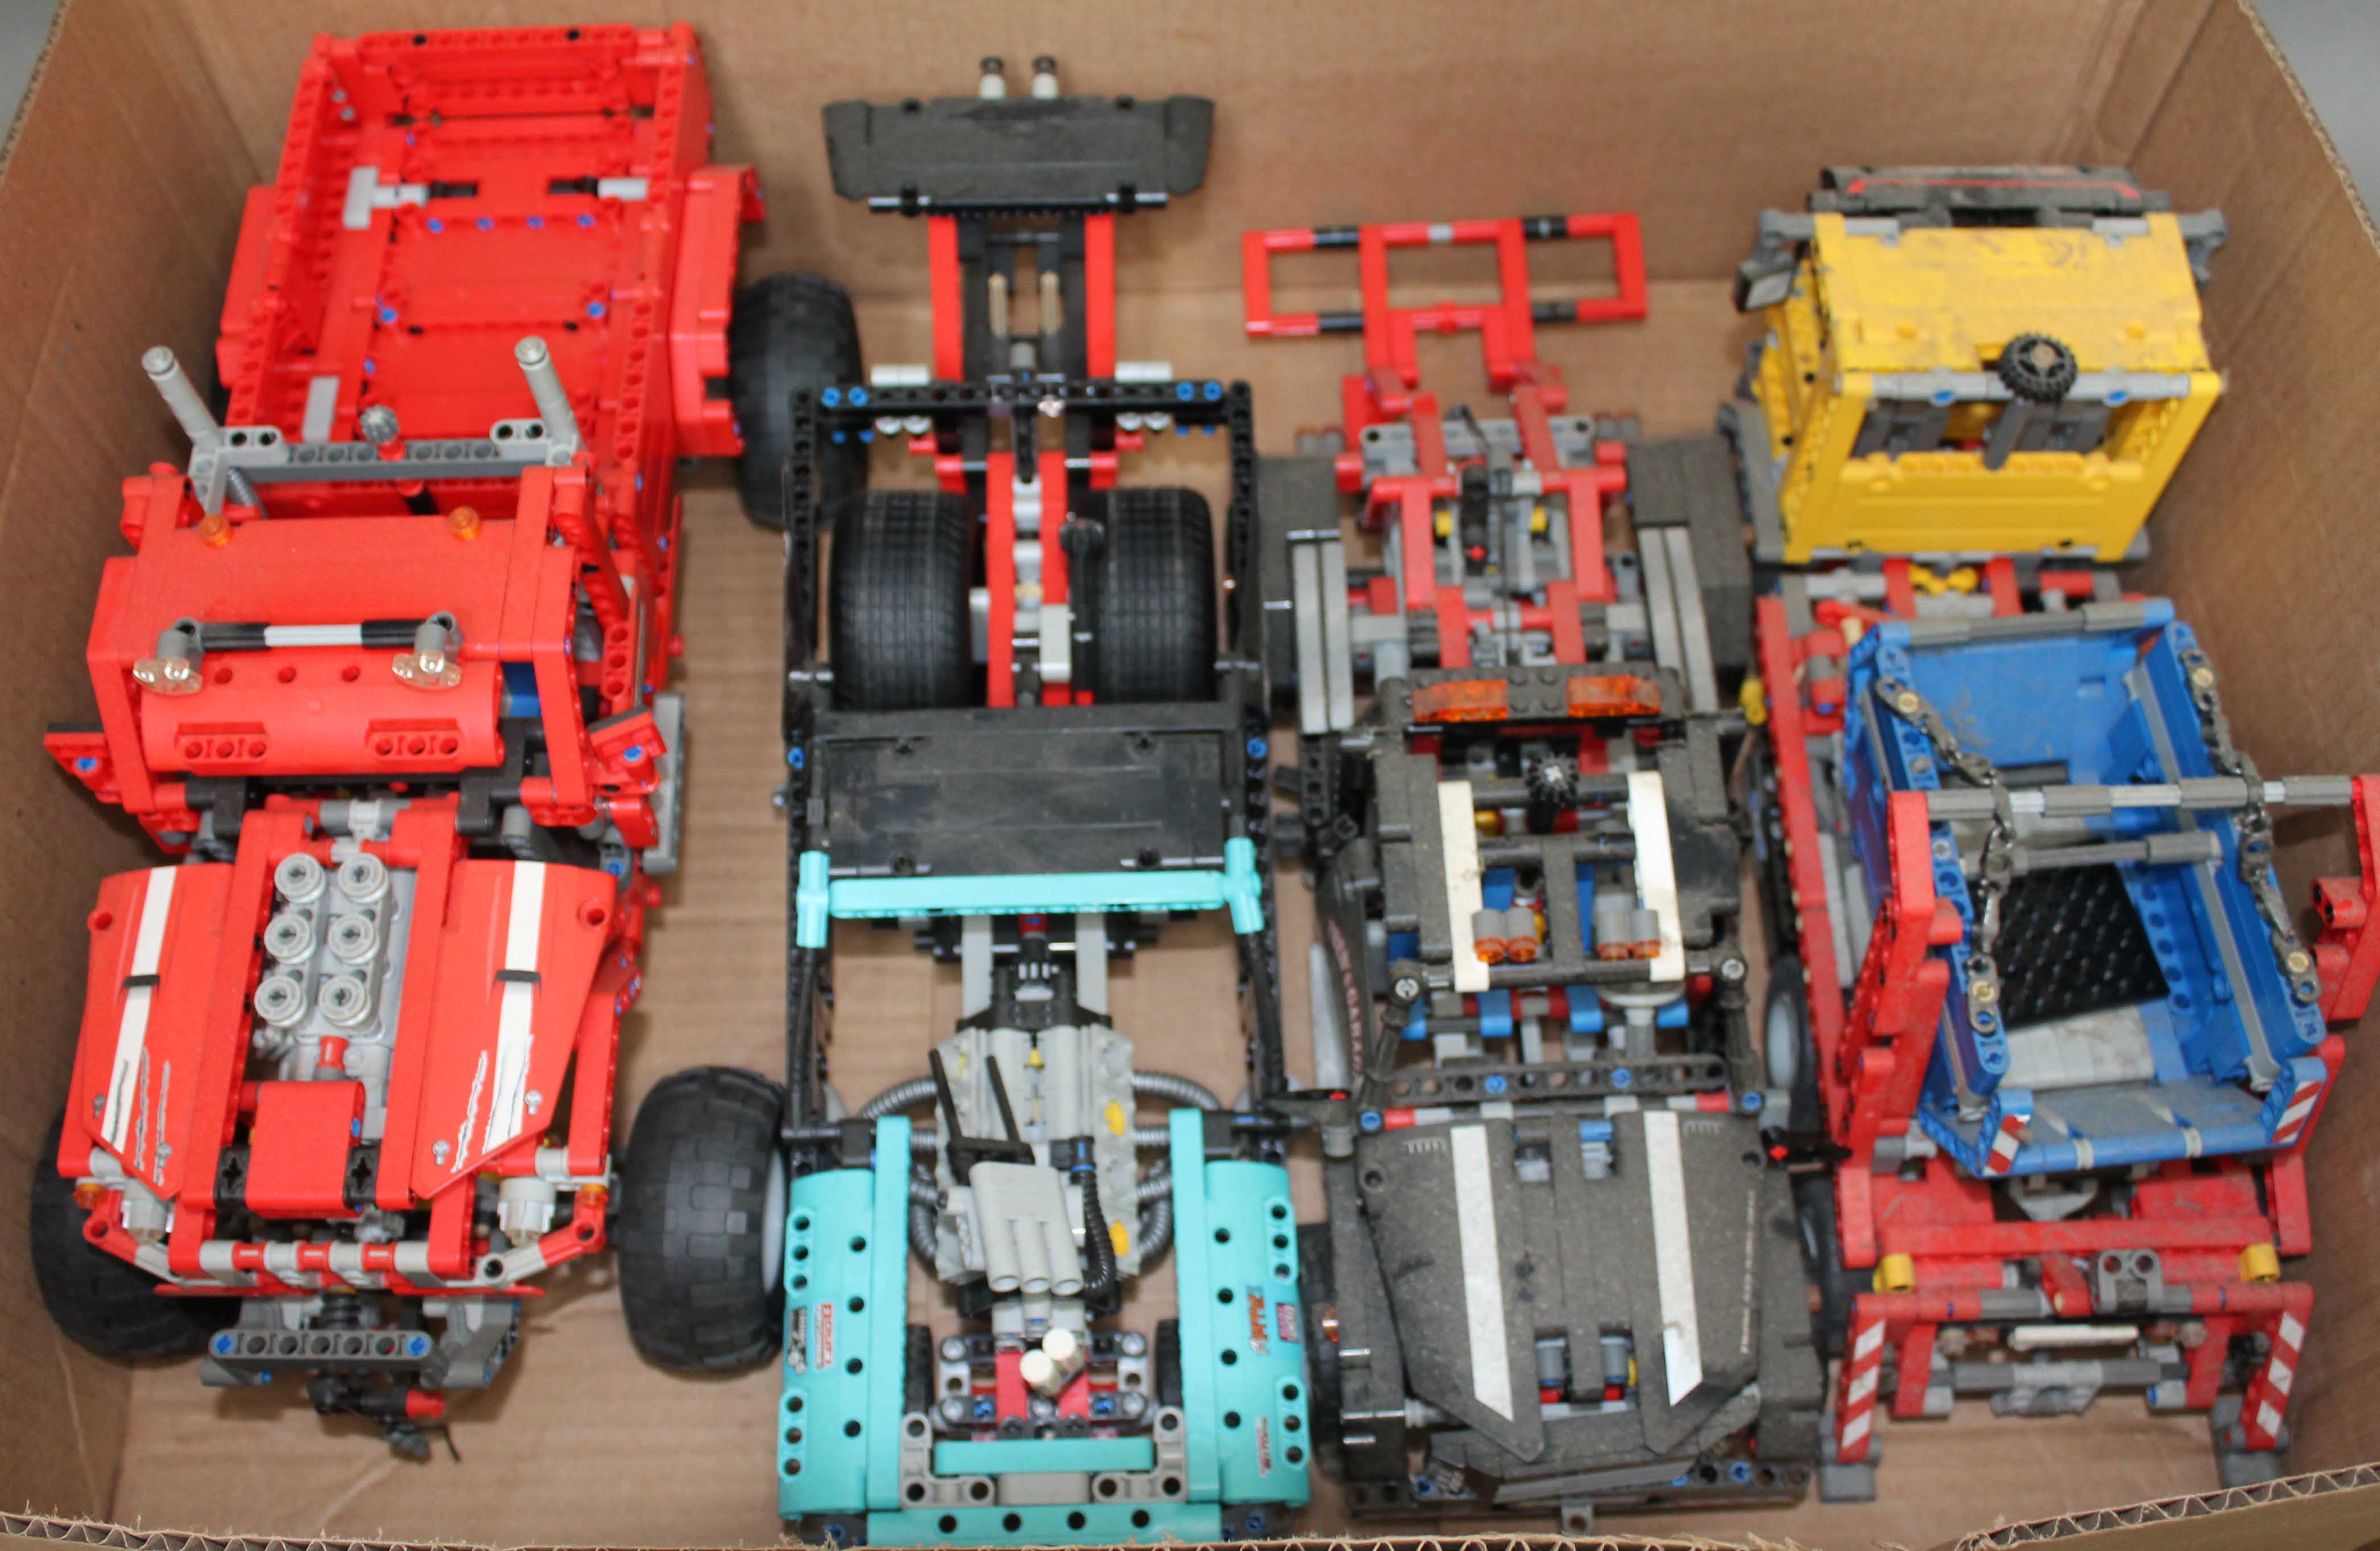 A box containing four Lego Technic models.